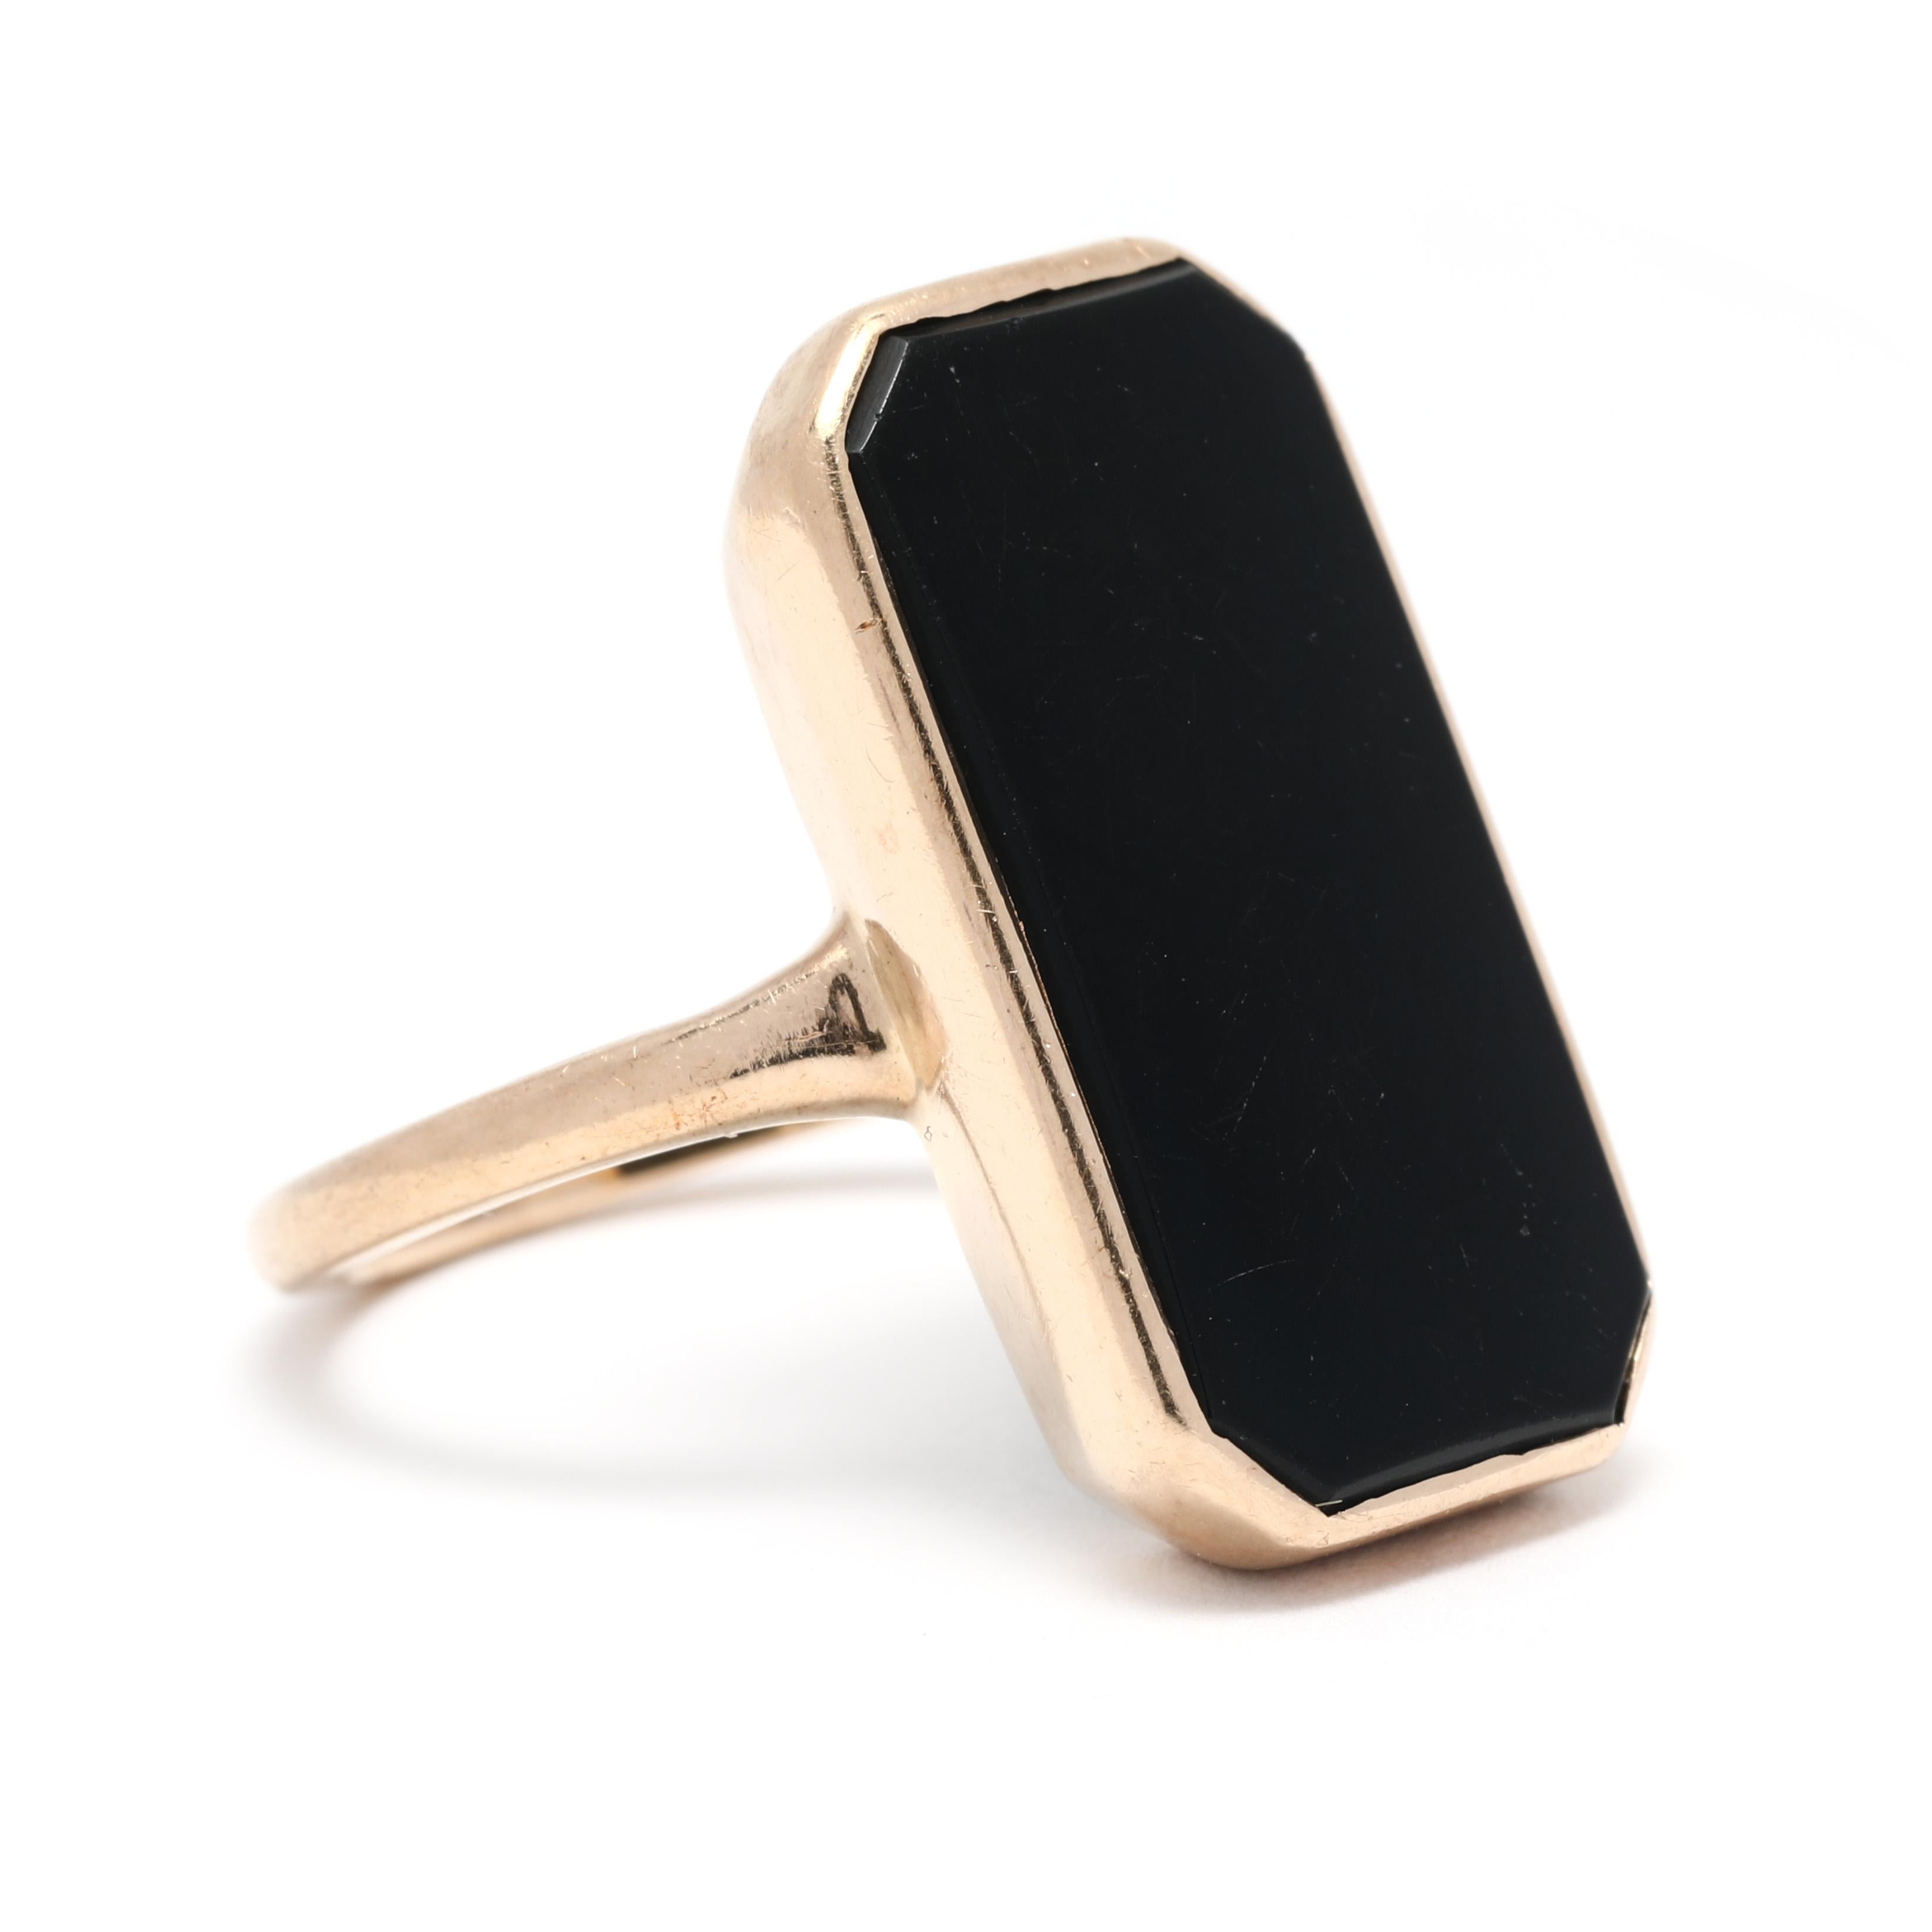 This vintage black onyx rectangle cocktail ring is truly a unique and one-of-a-kind piece. The black onyx gemstone is set in a 14k yellow gold setting, making it a durable and precious piece. The ring is a size 5 and is perfect for everyday wear.